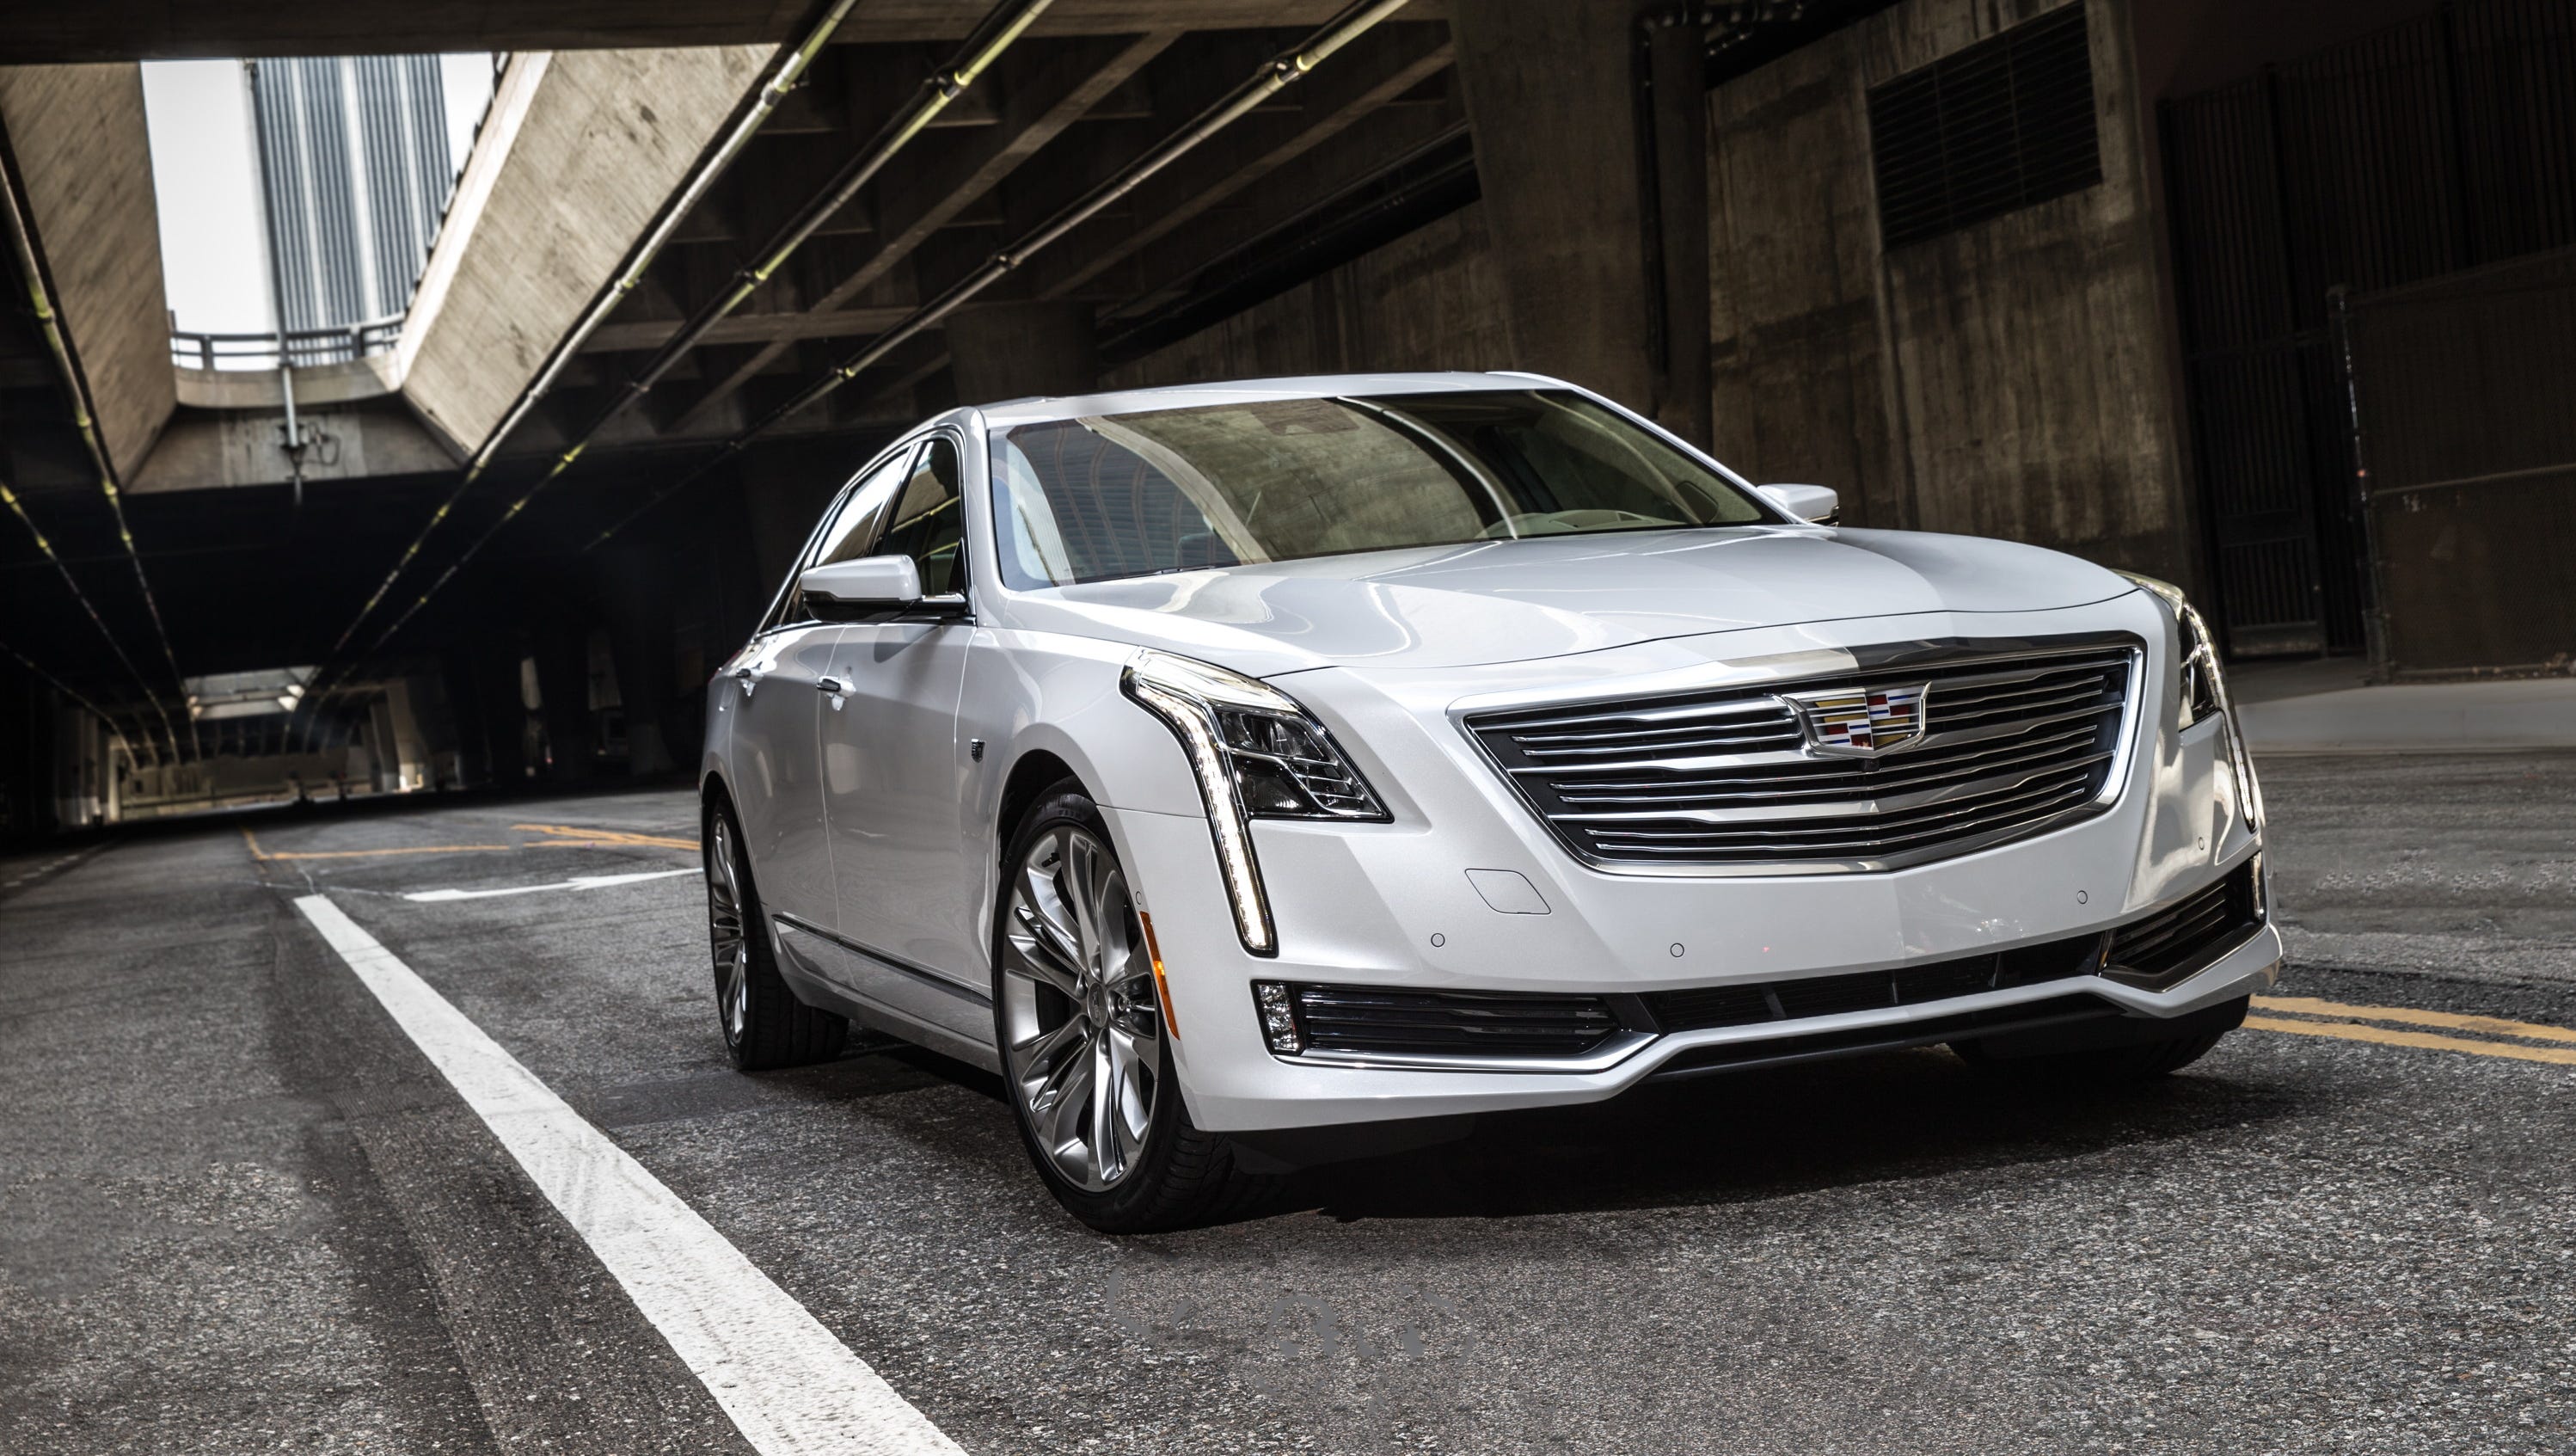 Cadillac CT6 plug-in hybrid goes on sale in spring 2017